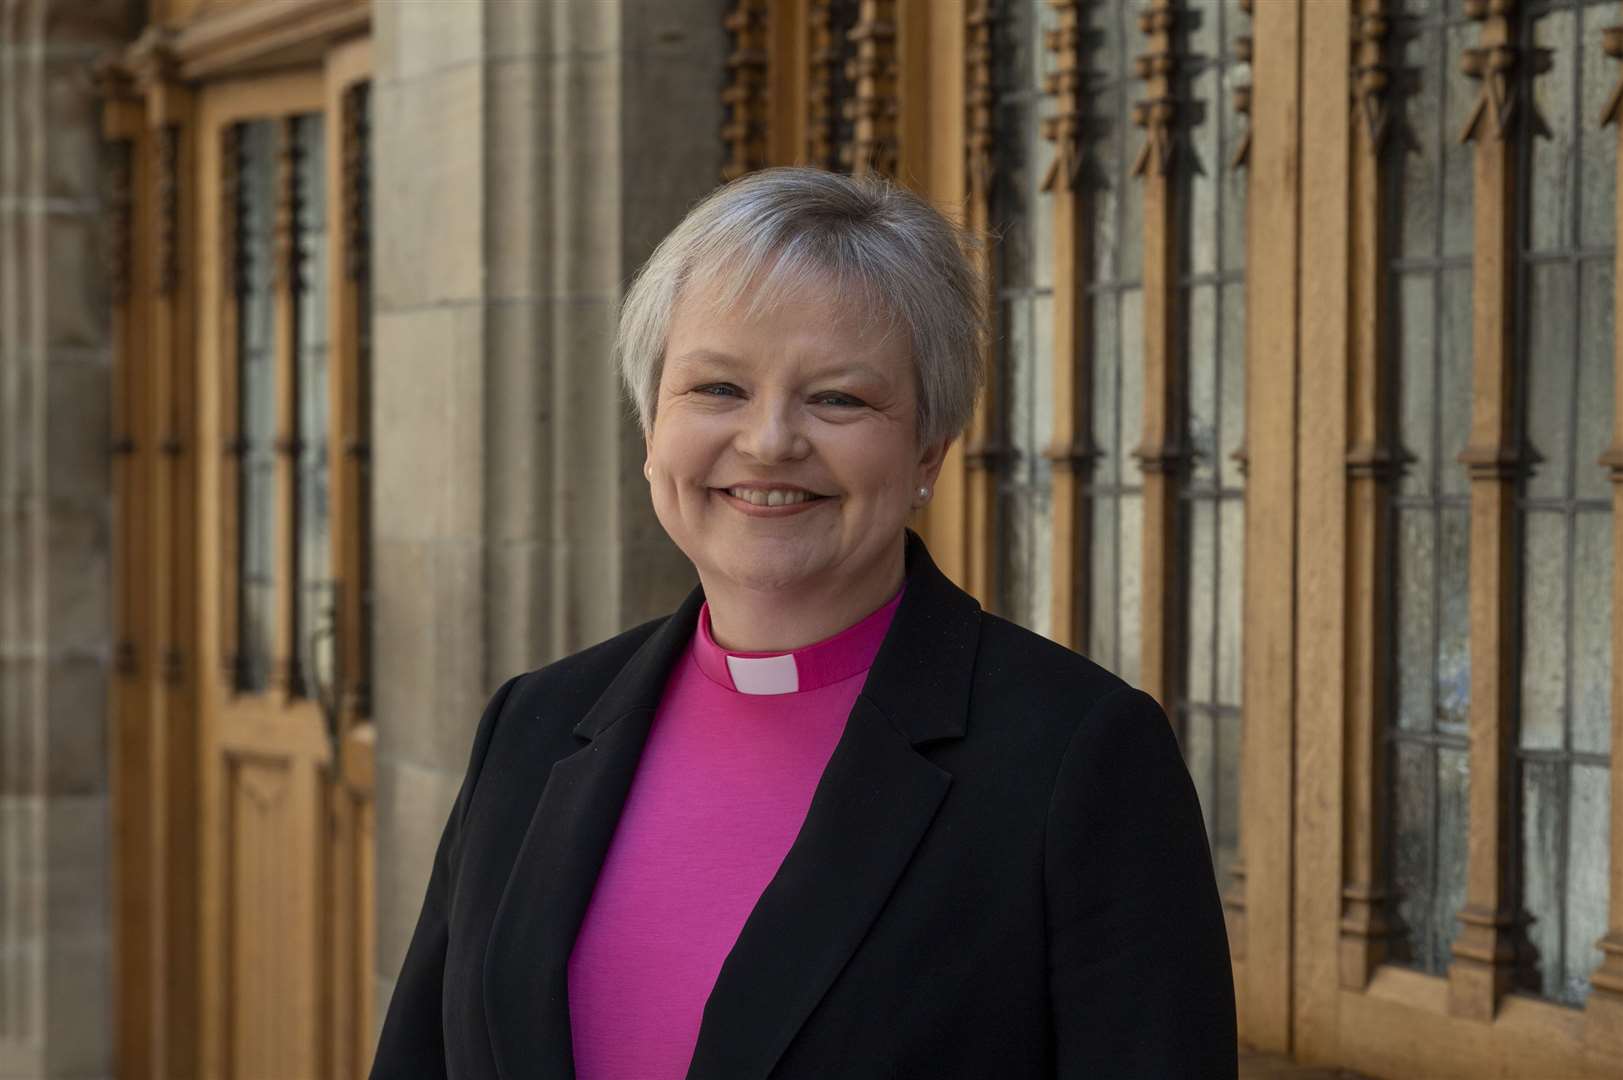 Rev Fiona Smith has been appointed Principal Clerk of the General Assembly of the Church of Scotland on a permanent basis..